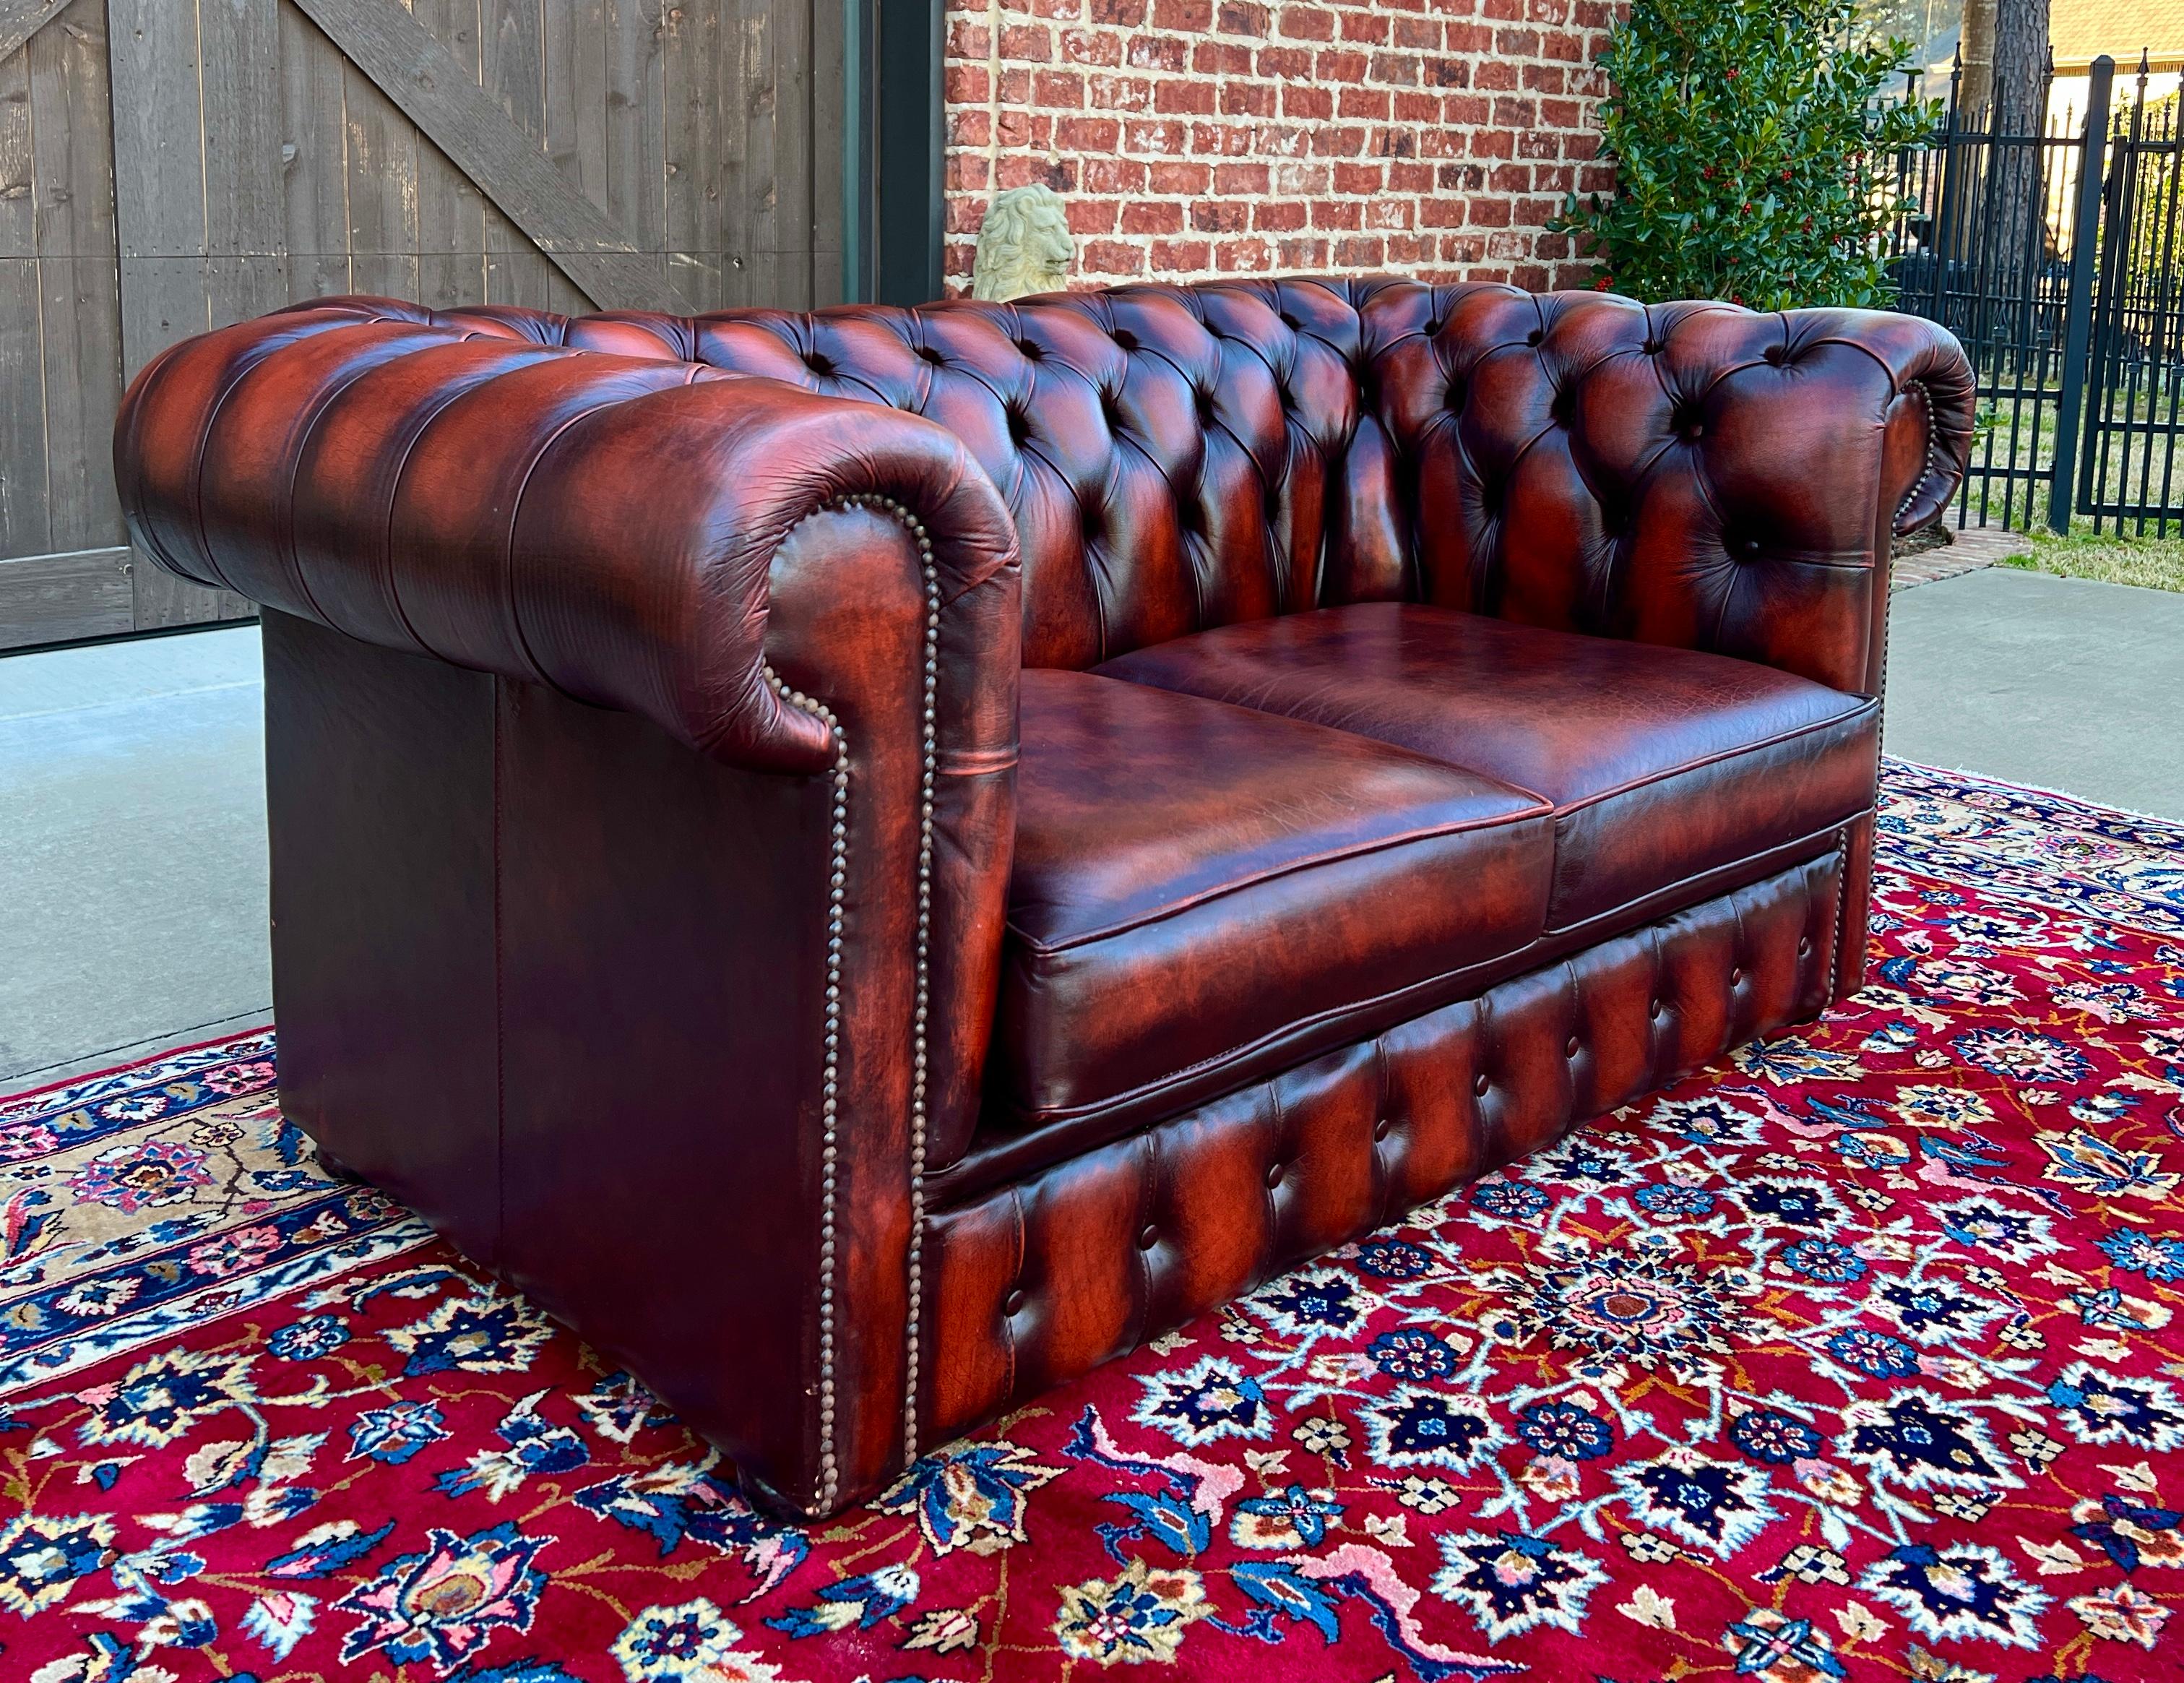 20th Century Vintage English Chesterfield Leather Tufted Love Seat Sofa Oxblood Red #2